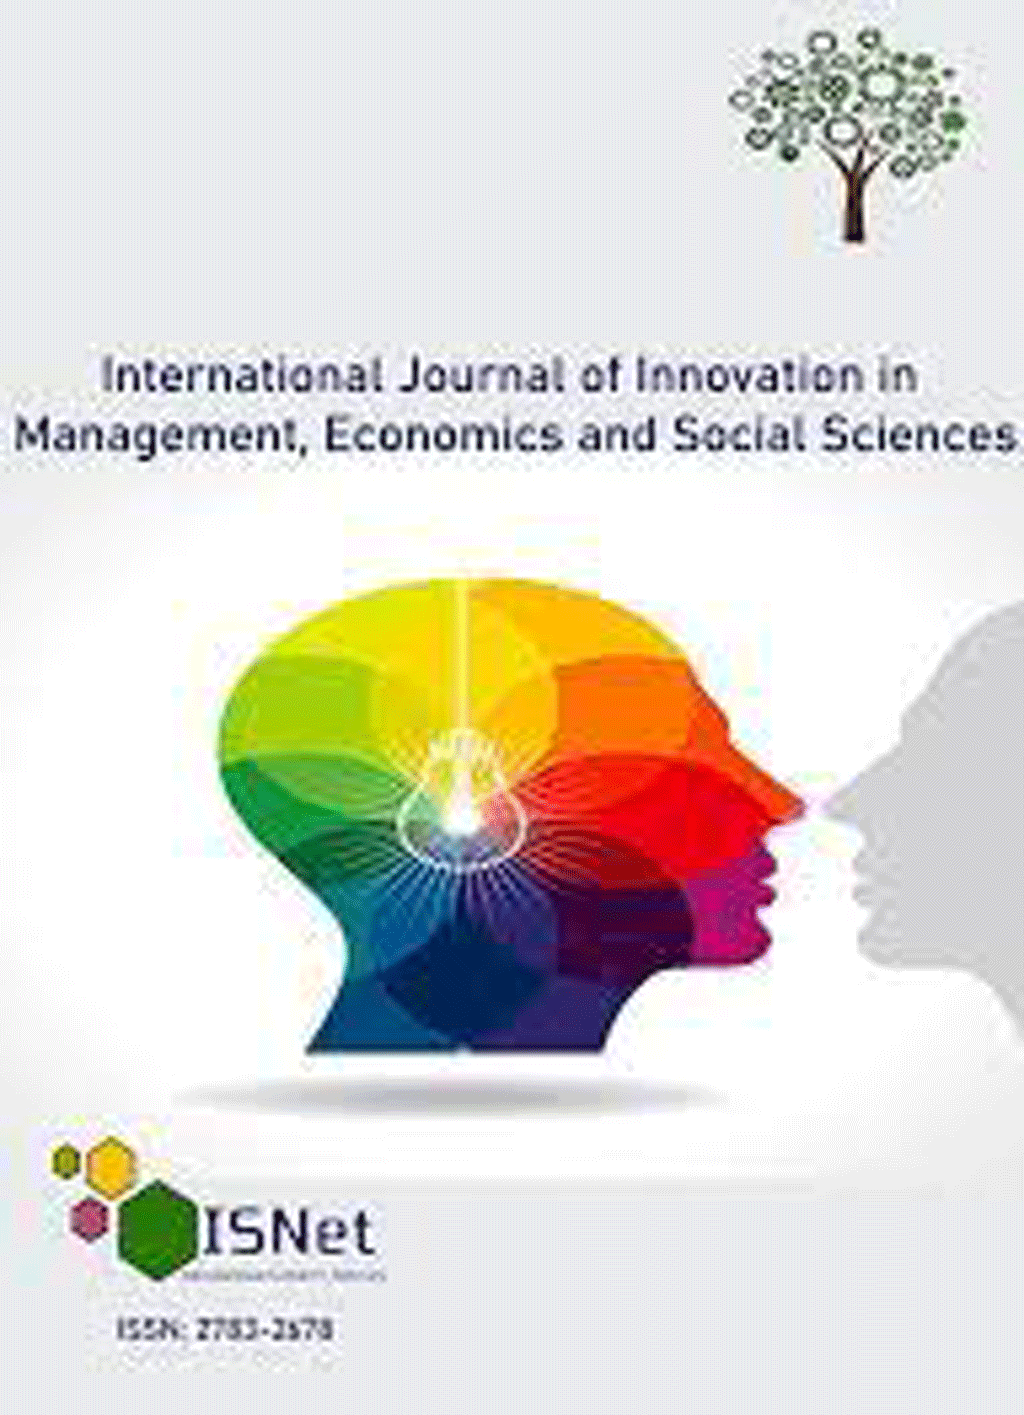 Innovation in Management, Economics and Social Sciences